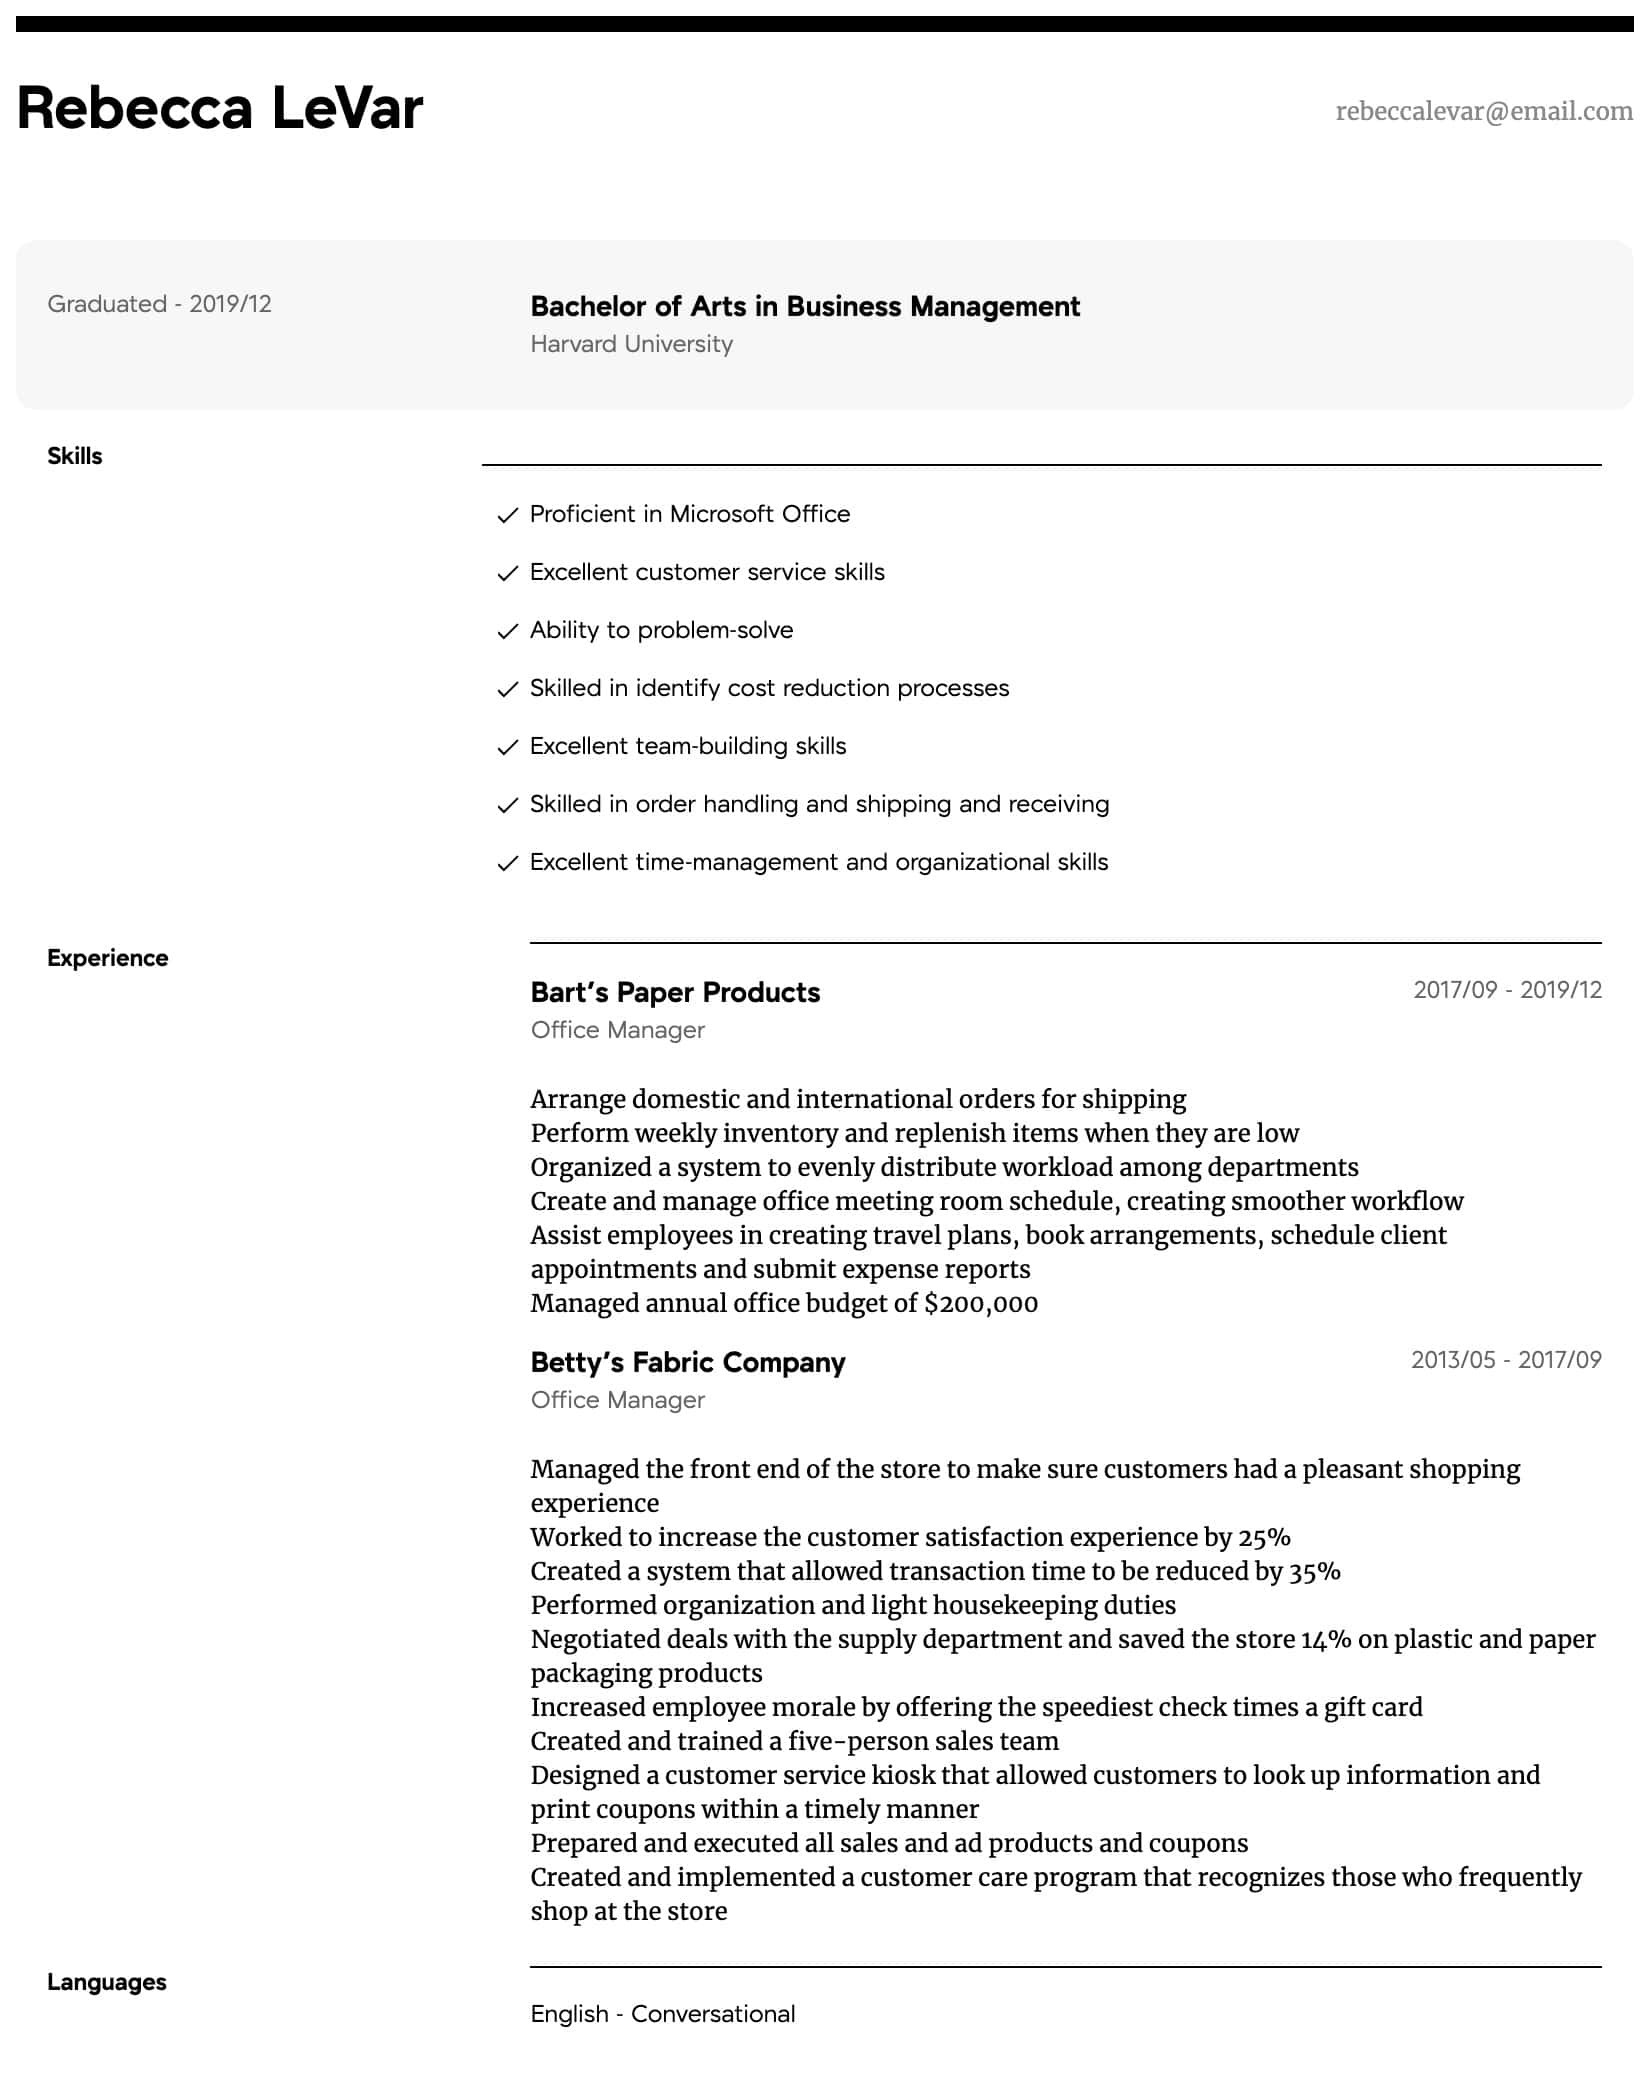 Sample Skills and Abilities for Management Resume Office Manager Resume Samples All Experience Levels Resume.com …